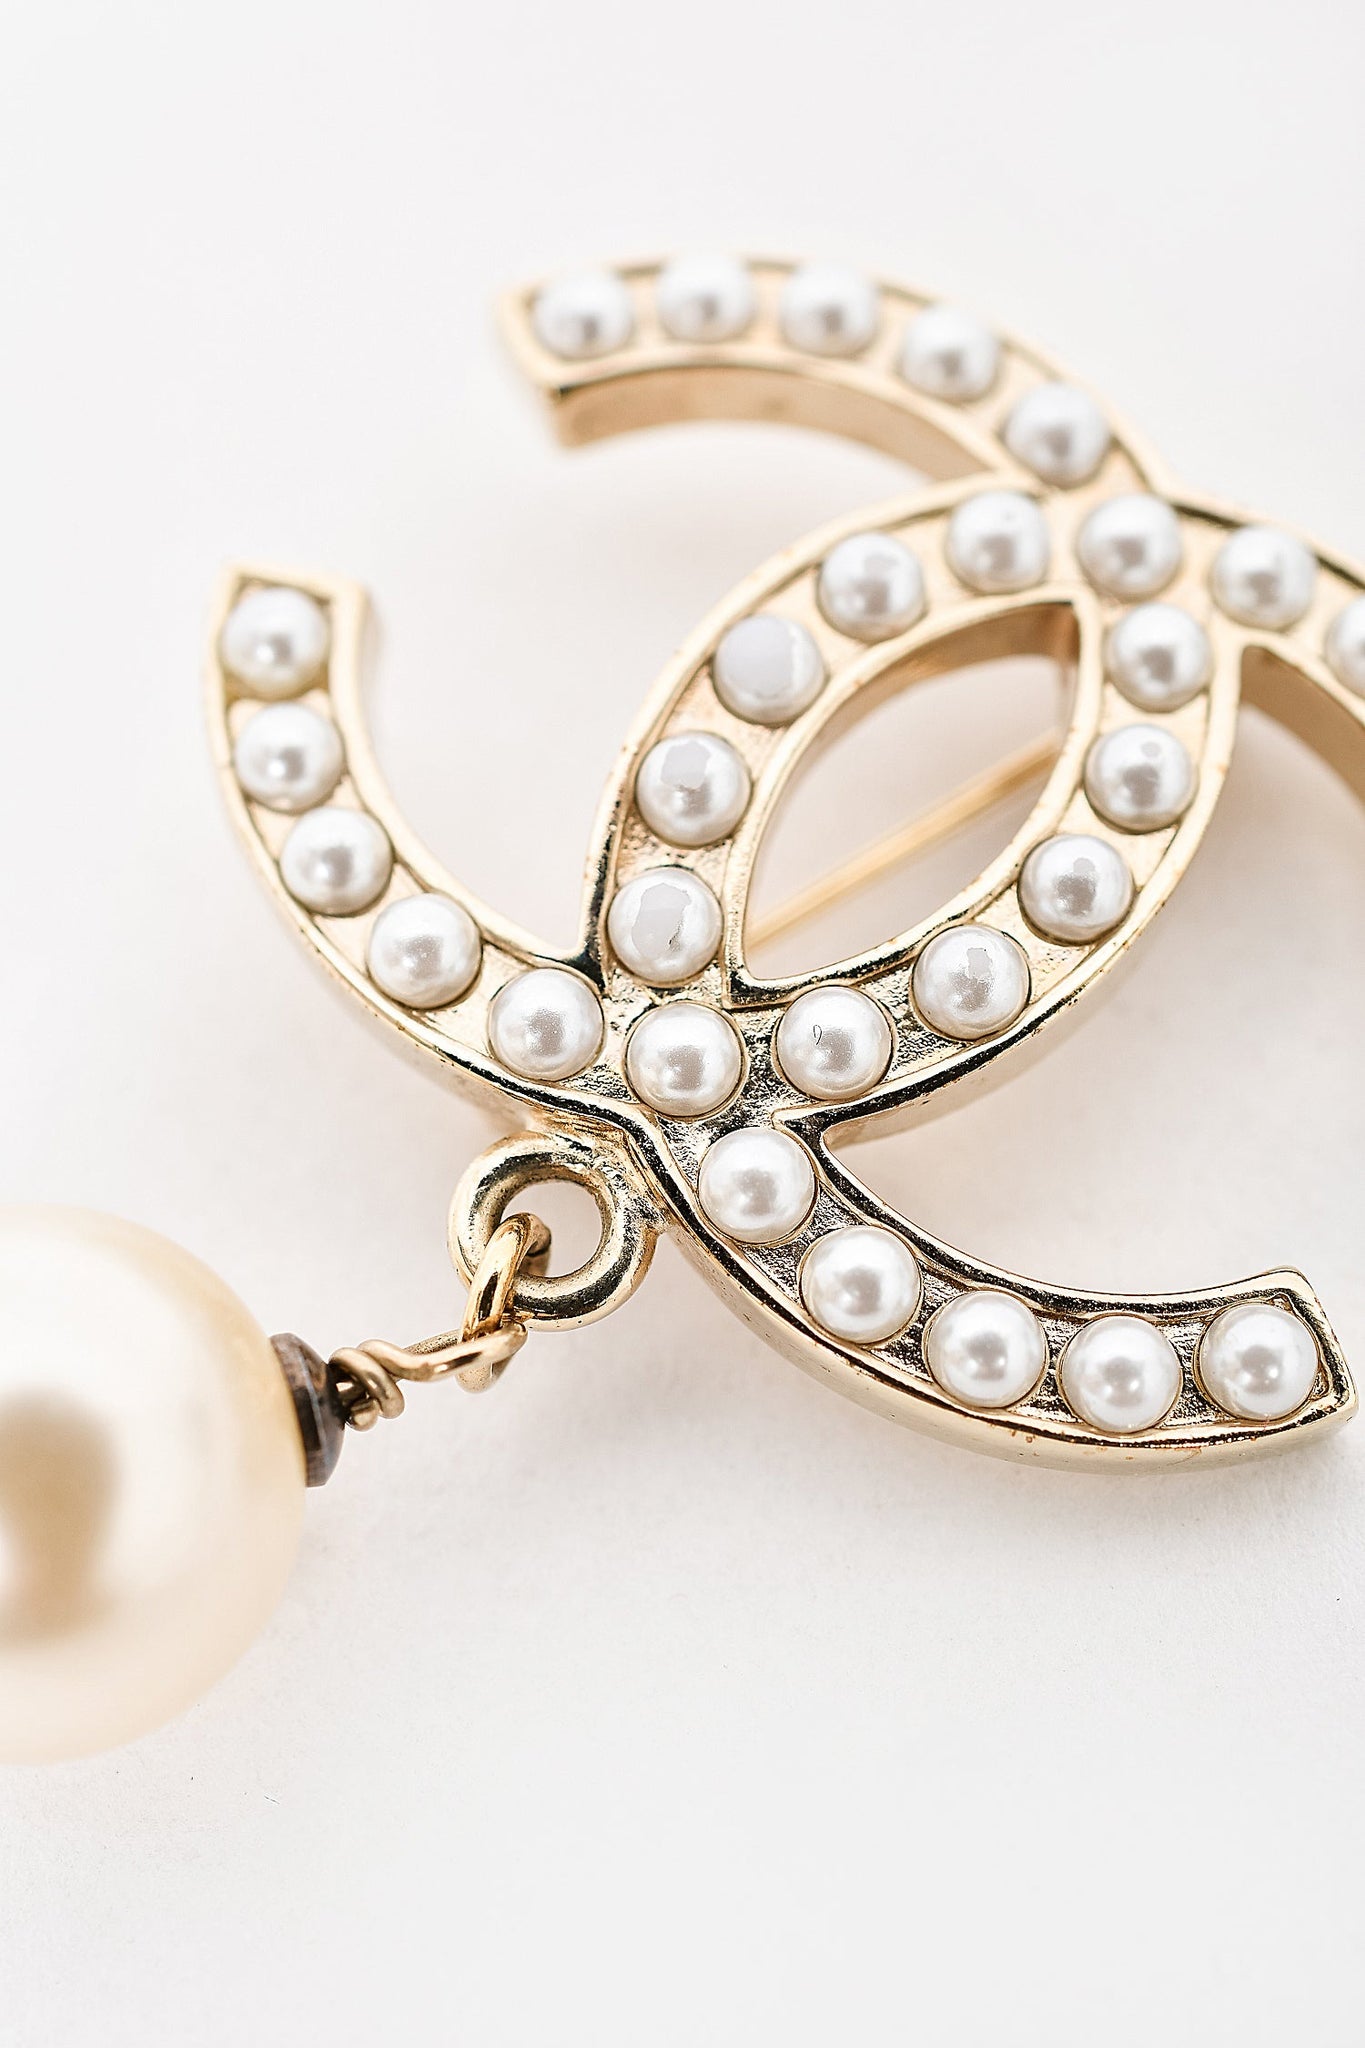 Sell & More Promotion ServicesChanel CC gold pearl brooch with